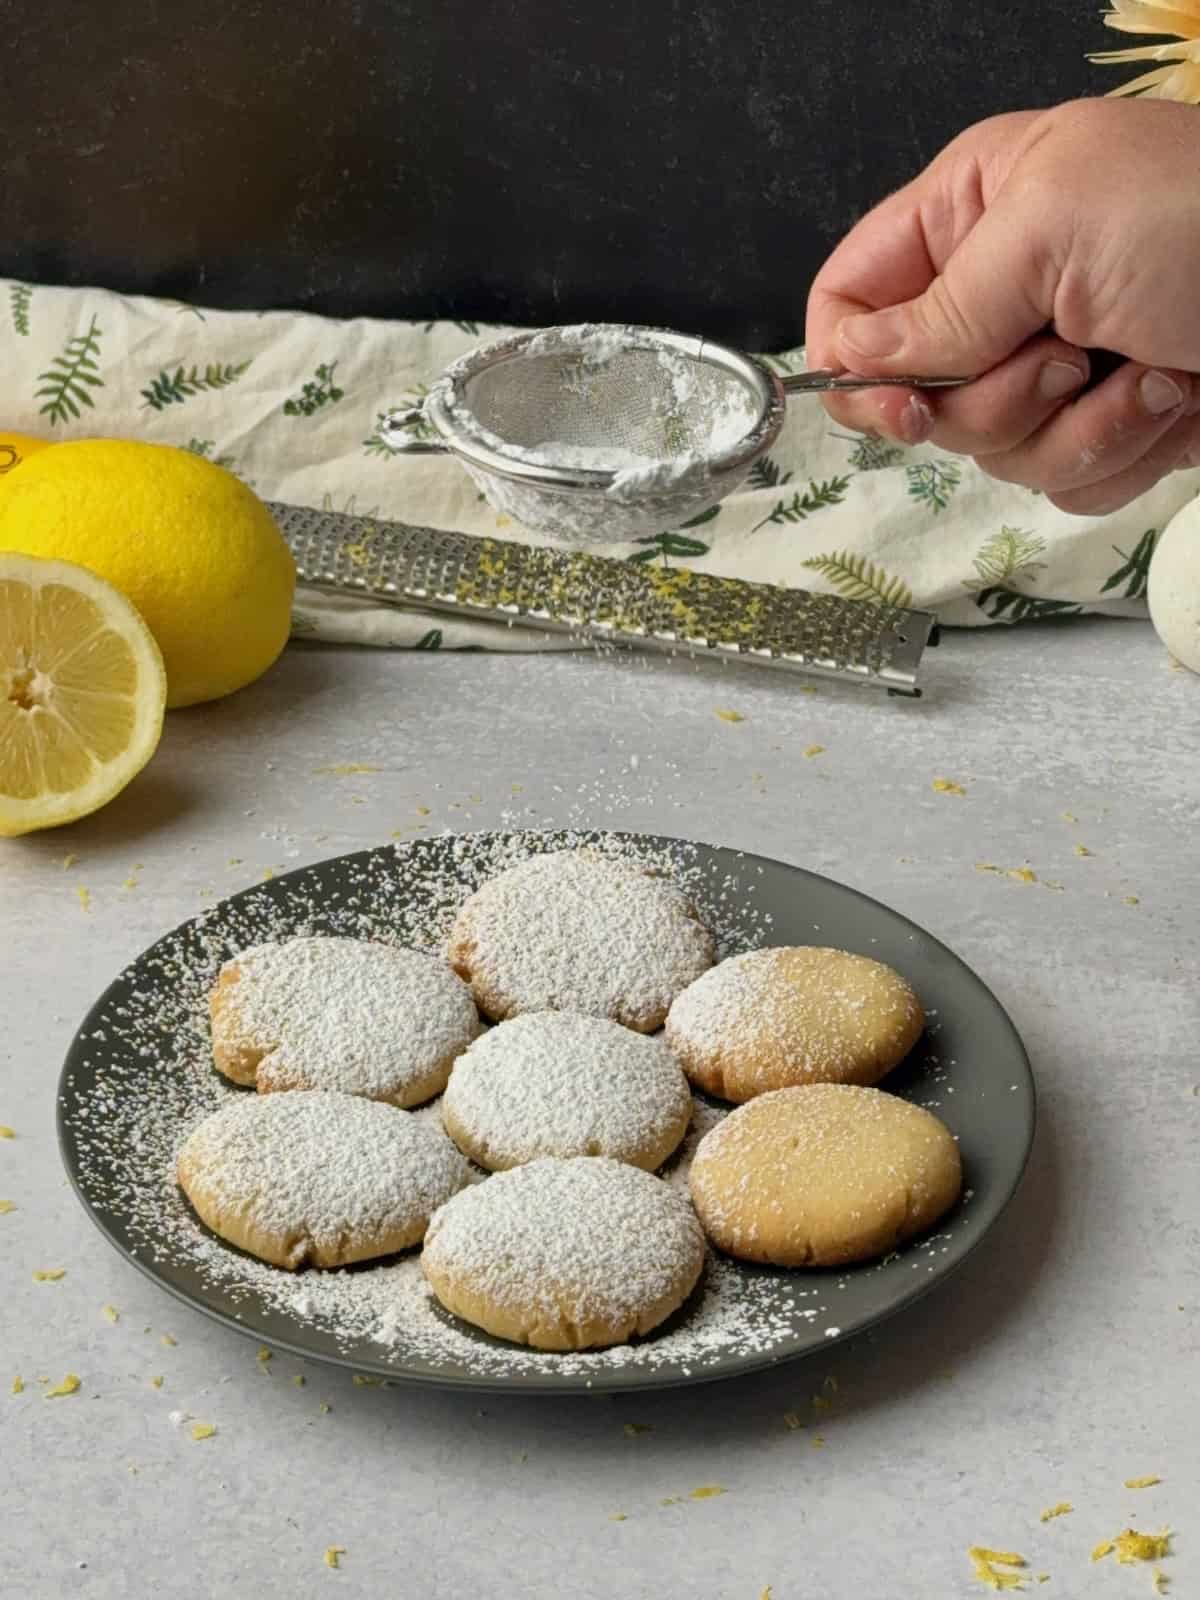 Dusting the lemon cookies with powdered sugar.